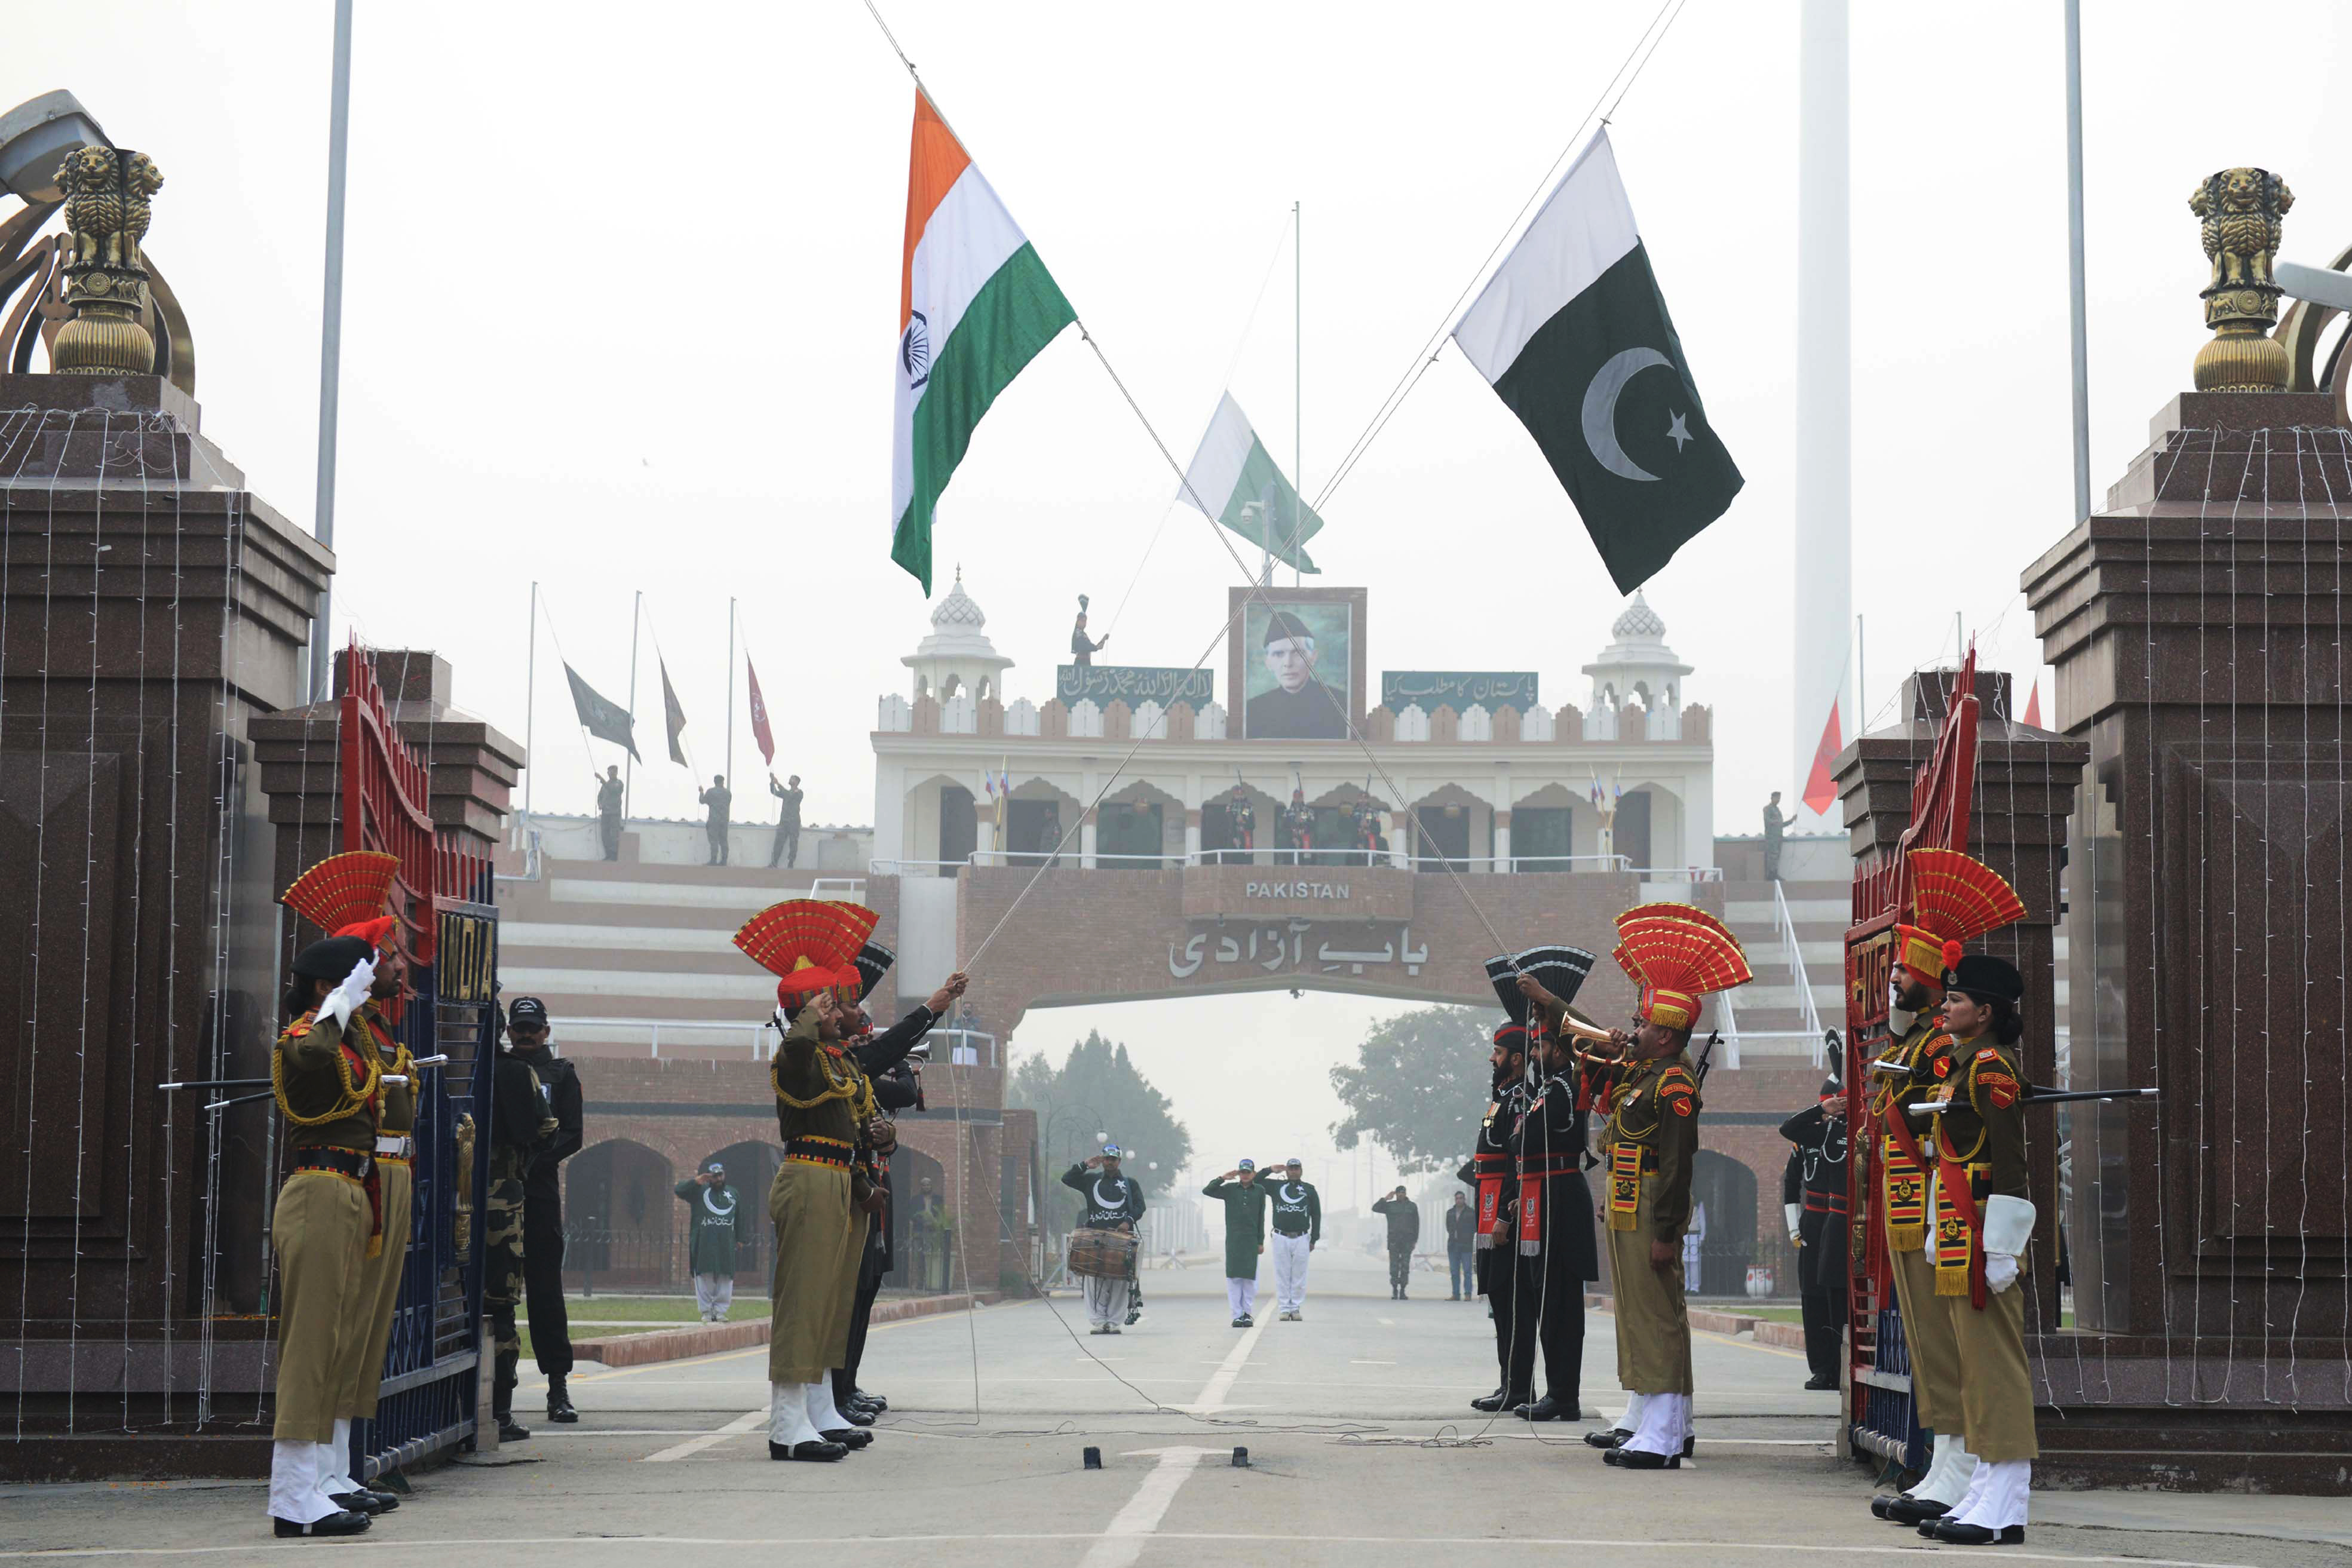 Pakistani Rangers (black uniforms) and Indian Border Security Force personnel (brown uniforms) at the Indian Pakistan Wagah Border post about 35km from Amritsar on Jan. 26, 2018. (Narinder Nanu&mdash;AFP/Getty Images)